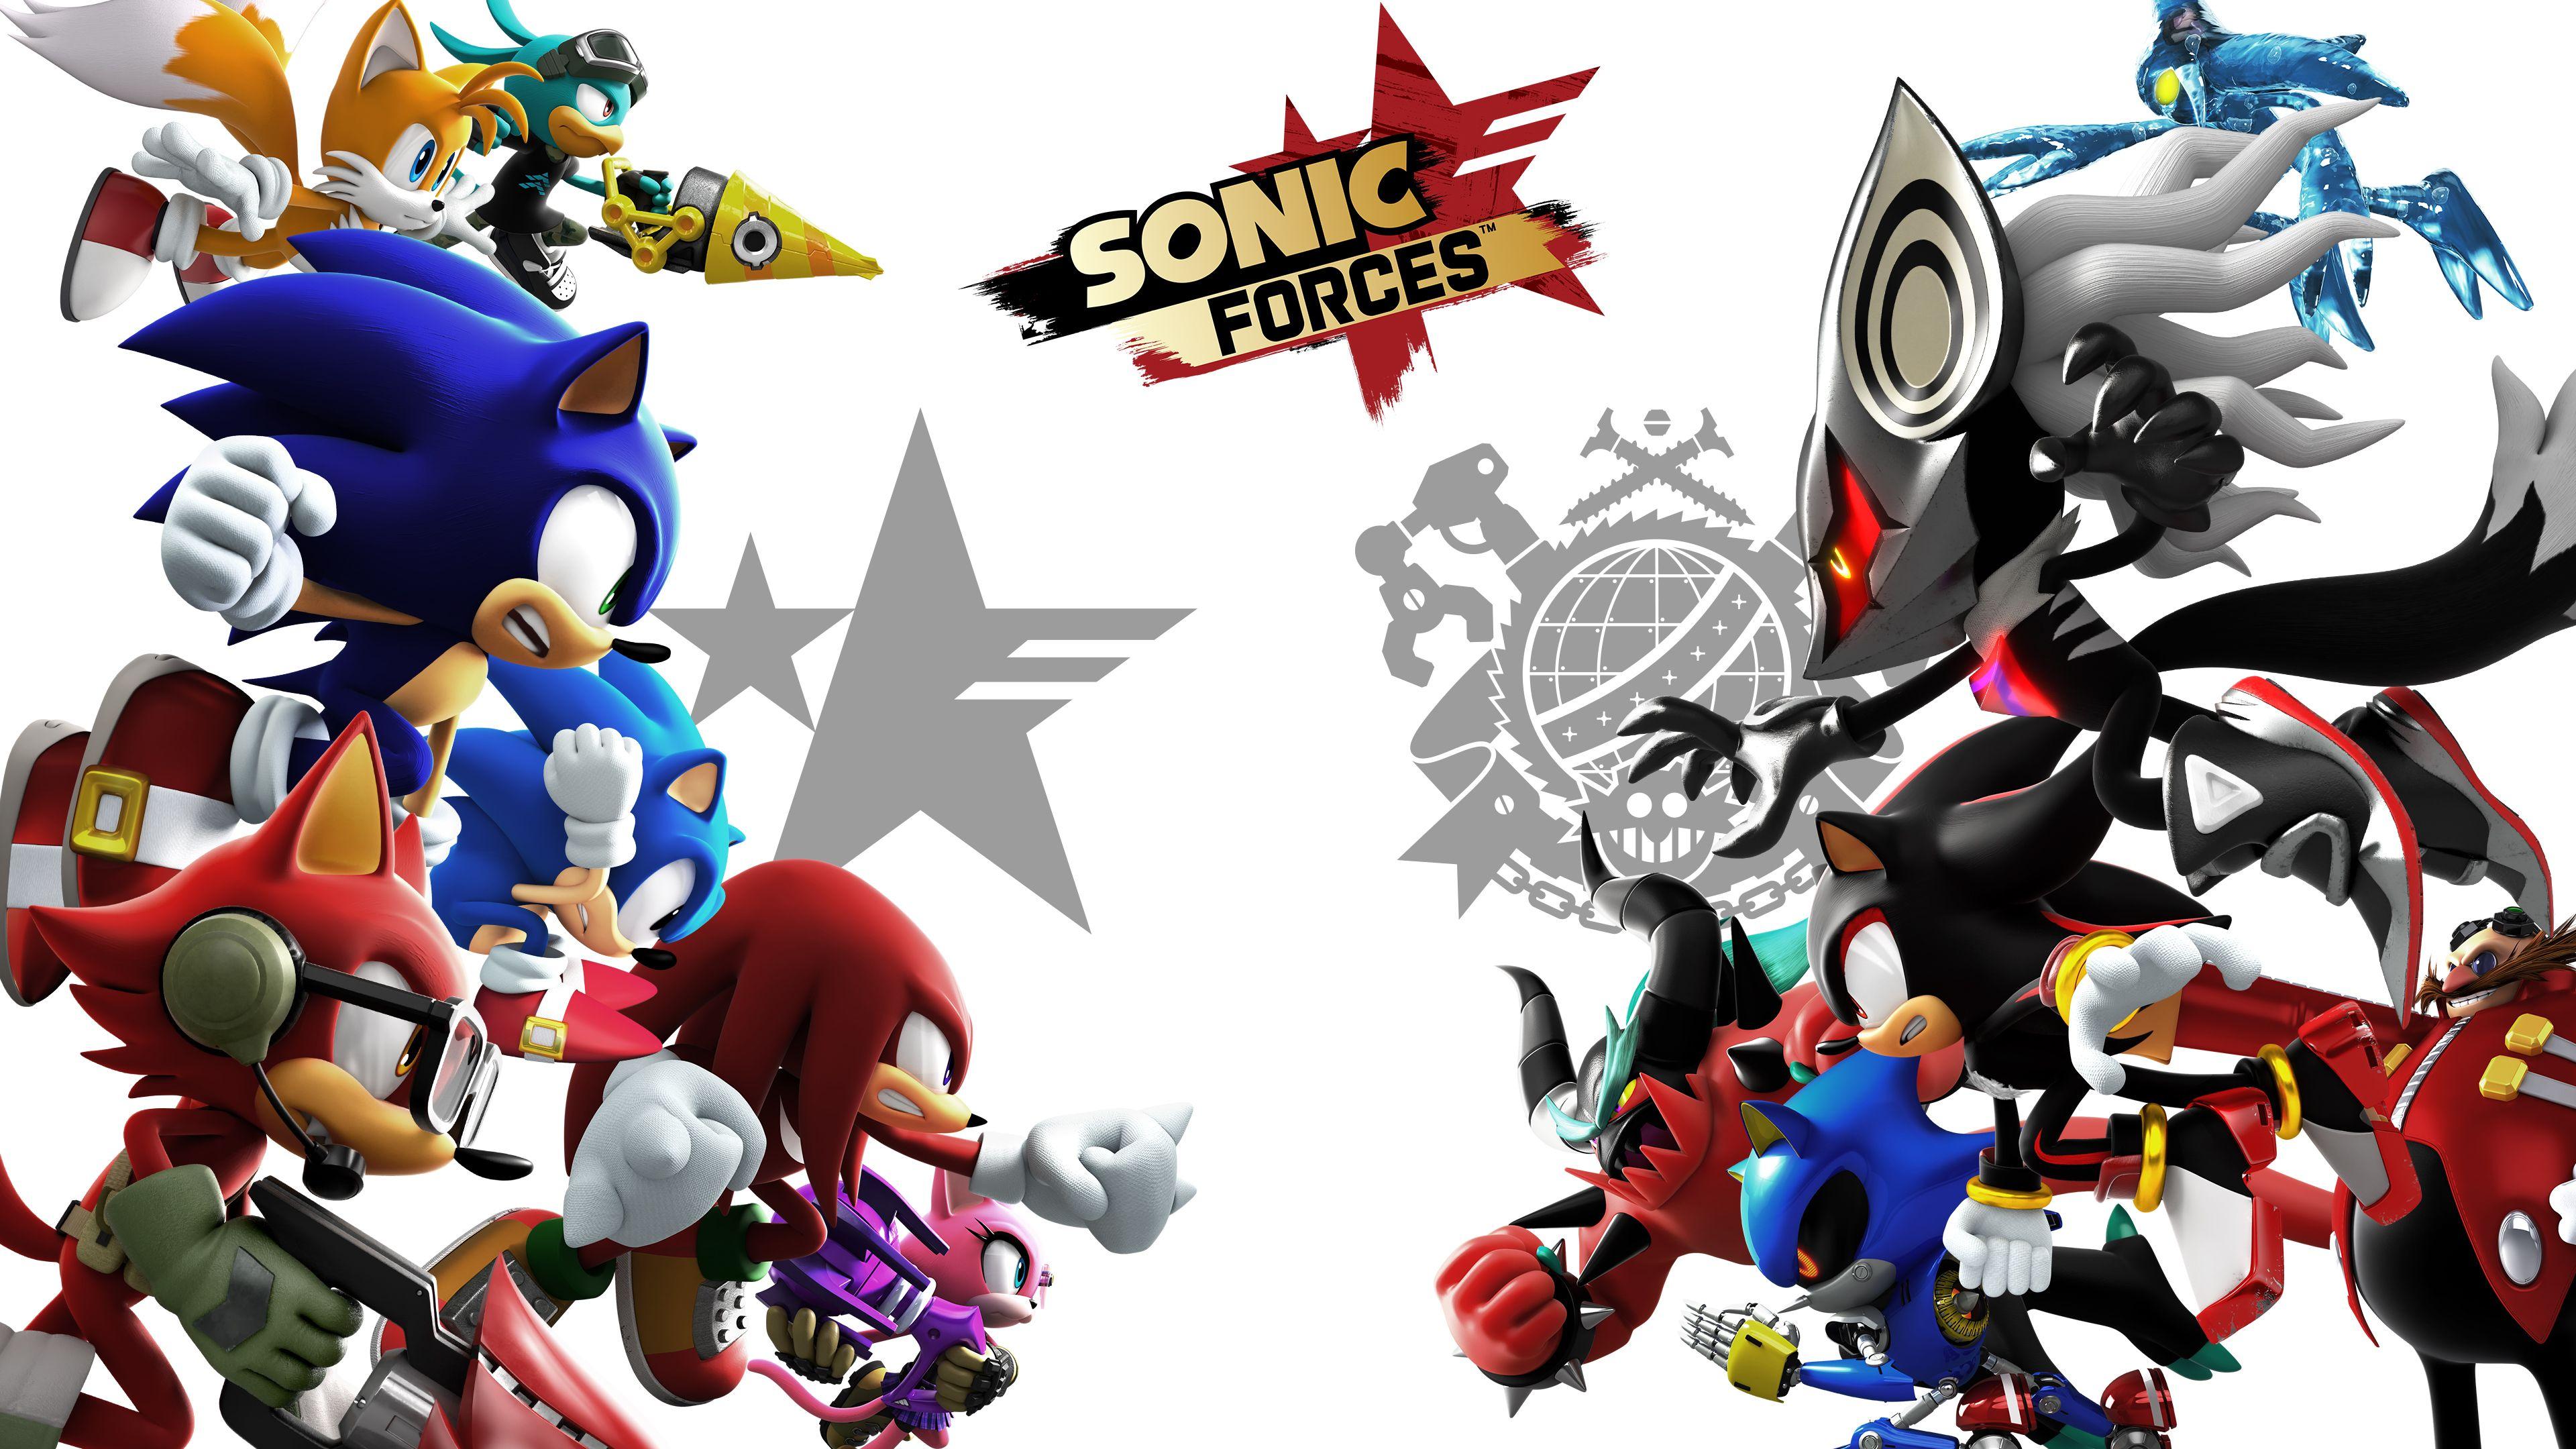 Sonic Forces Heroes Wallpaper -3840x2160- Sonic News